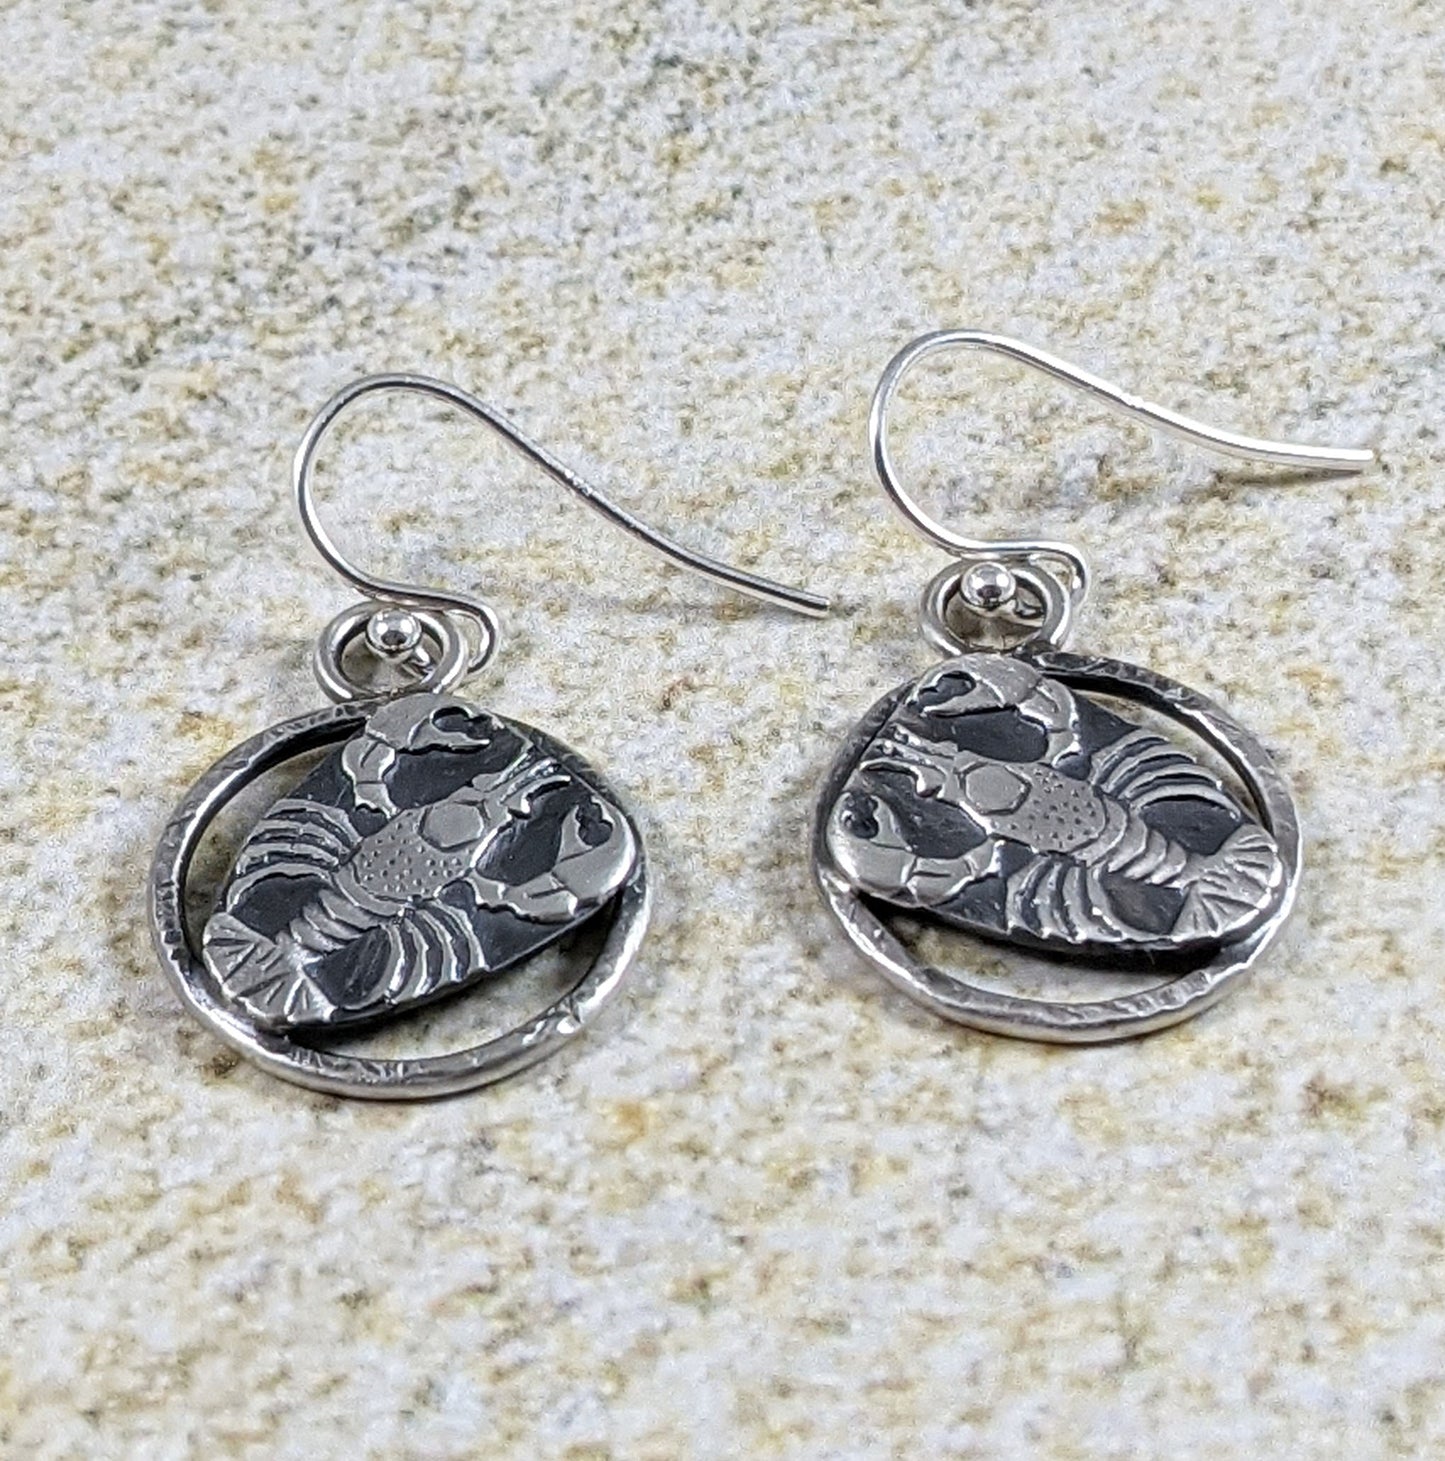 Sterling silver lobster earrings. The lobster is a detailed raised impression and is attached to a sterling open hoop that has a hammered texture design.